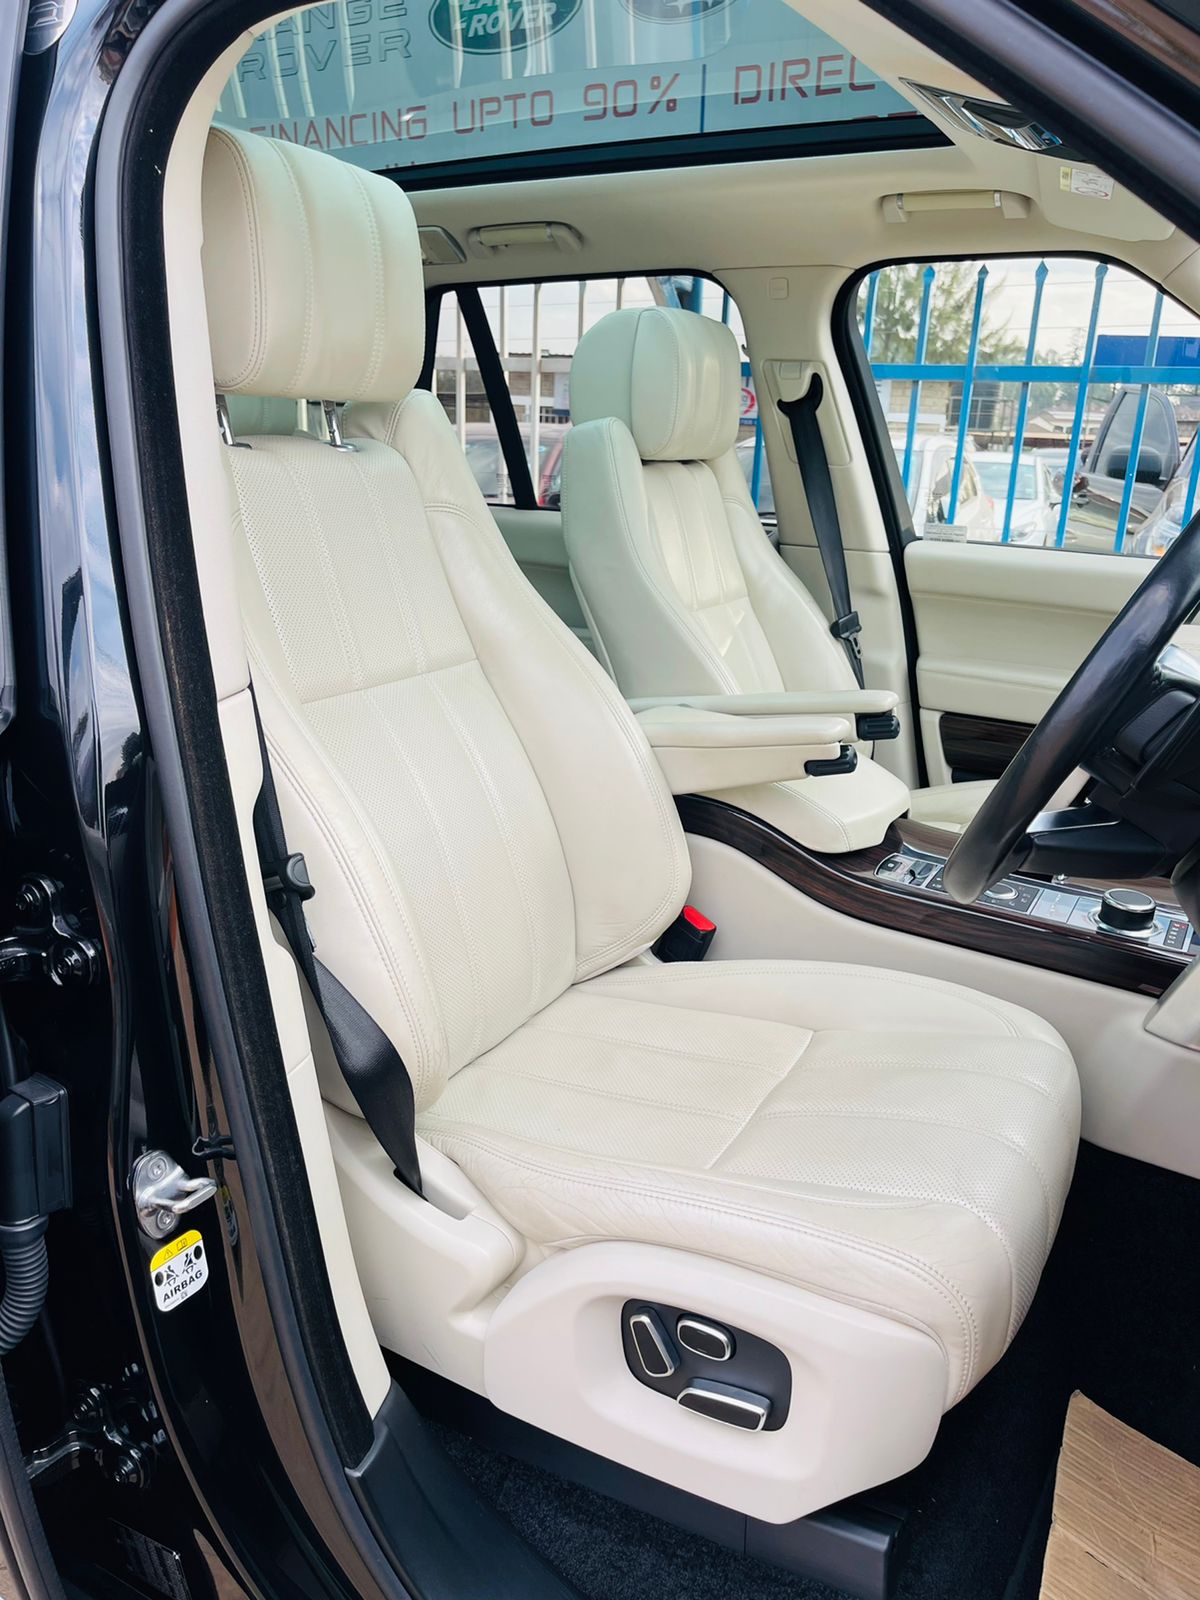 RANGE ROVER VOGUE SUNROOF 2015 EXCLUSIVE CHEAPEST QUICK SALE